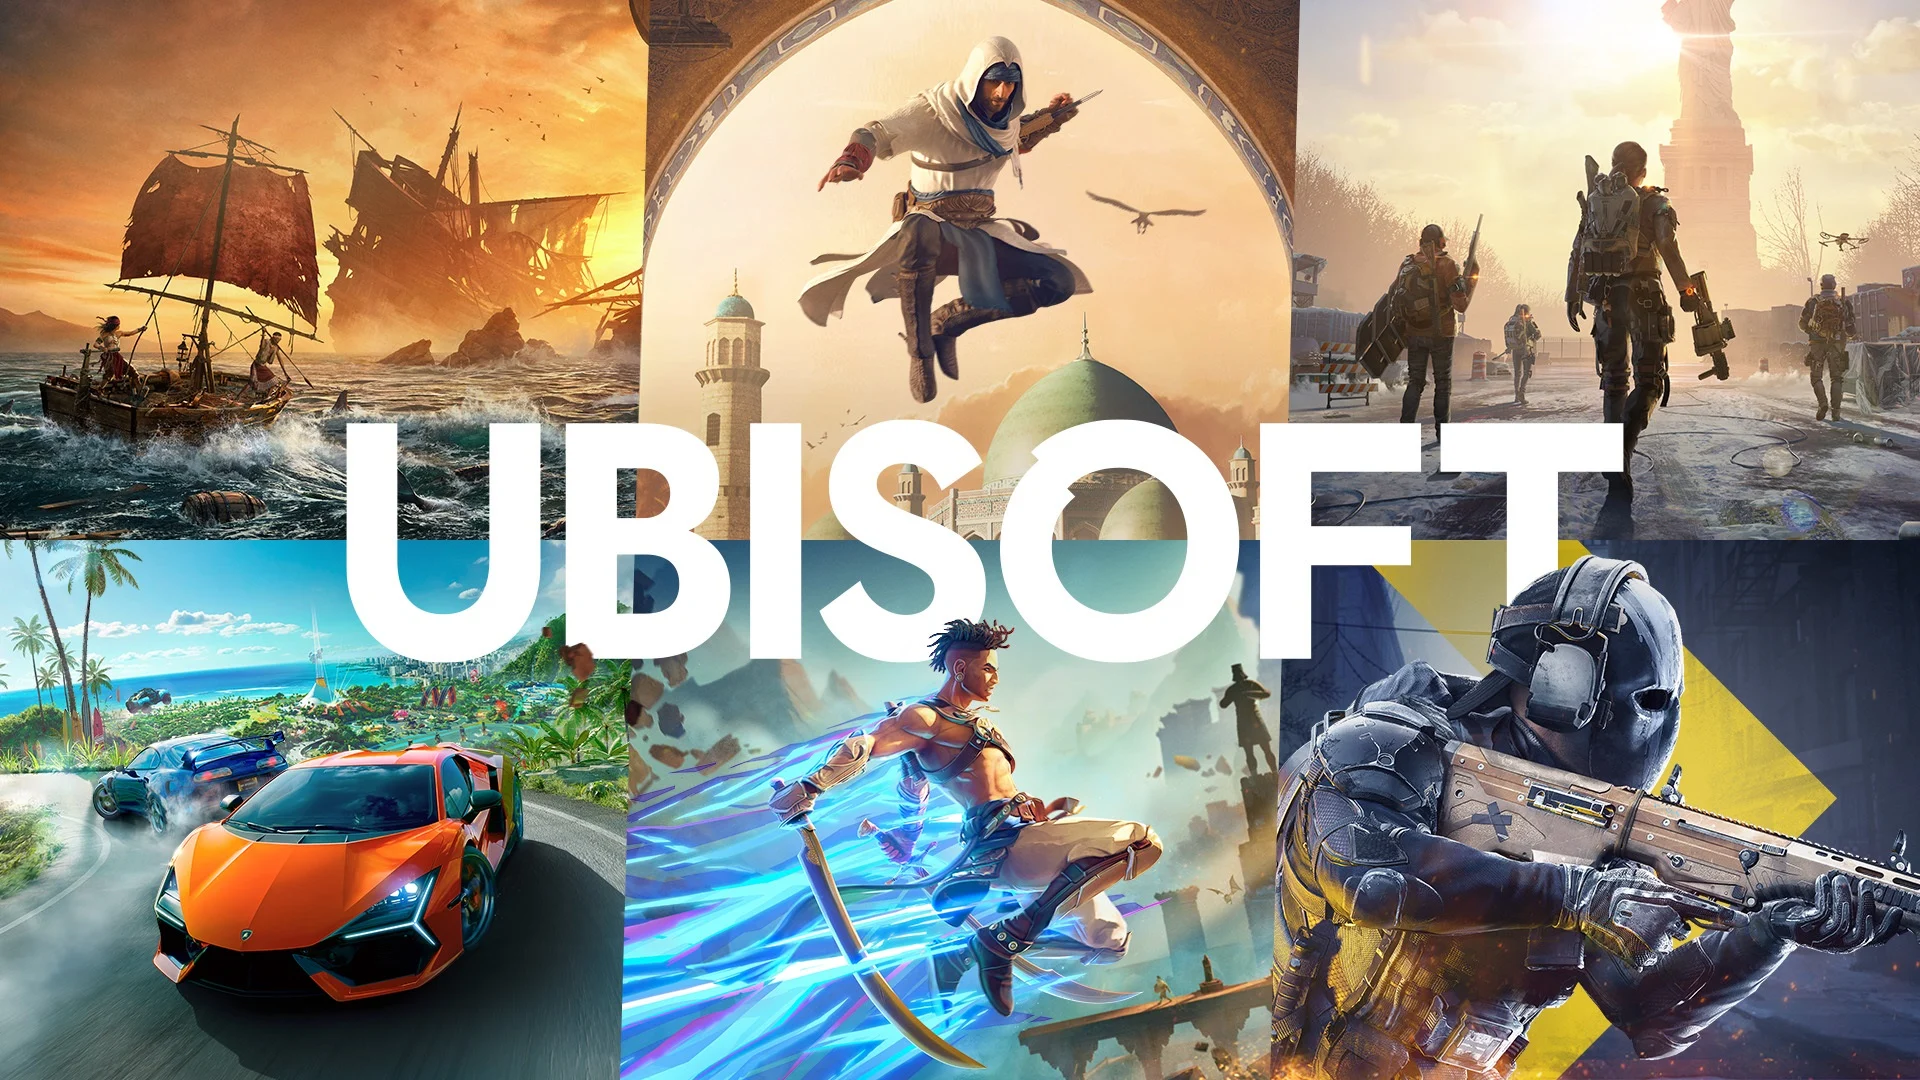 Save Big: Ubisoft The Crew Motorfest Discount Delivers Jaw-Dropping 15-20% Savings Just Weeks After Launch!